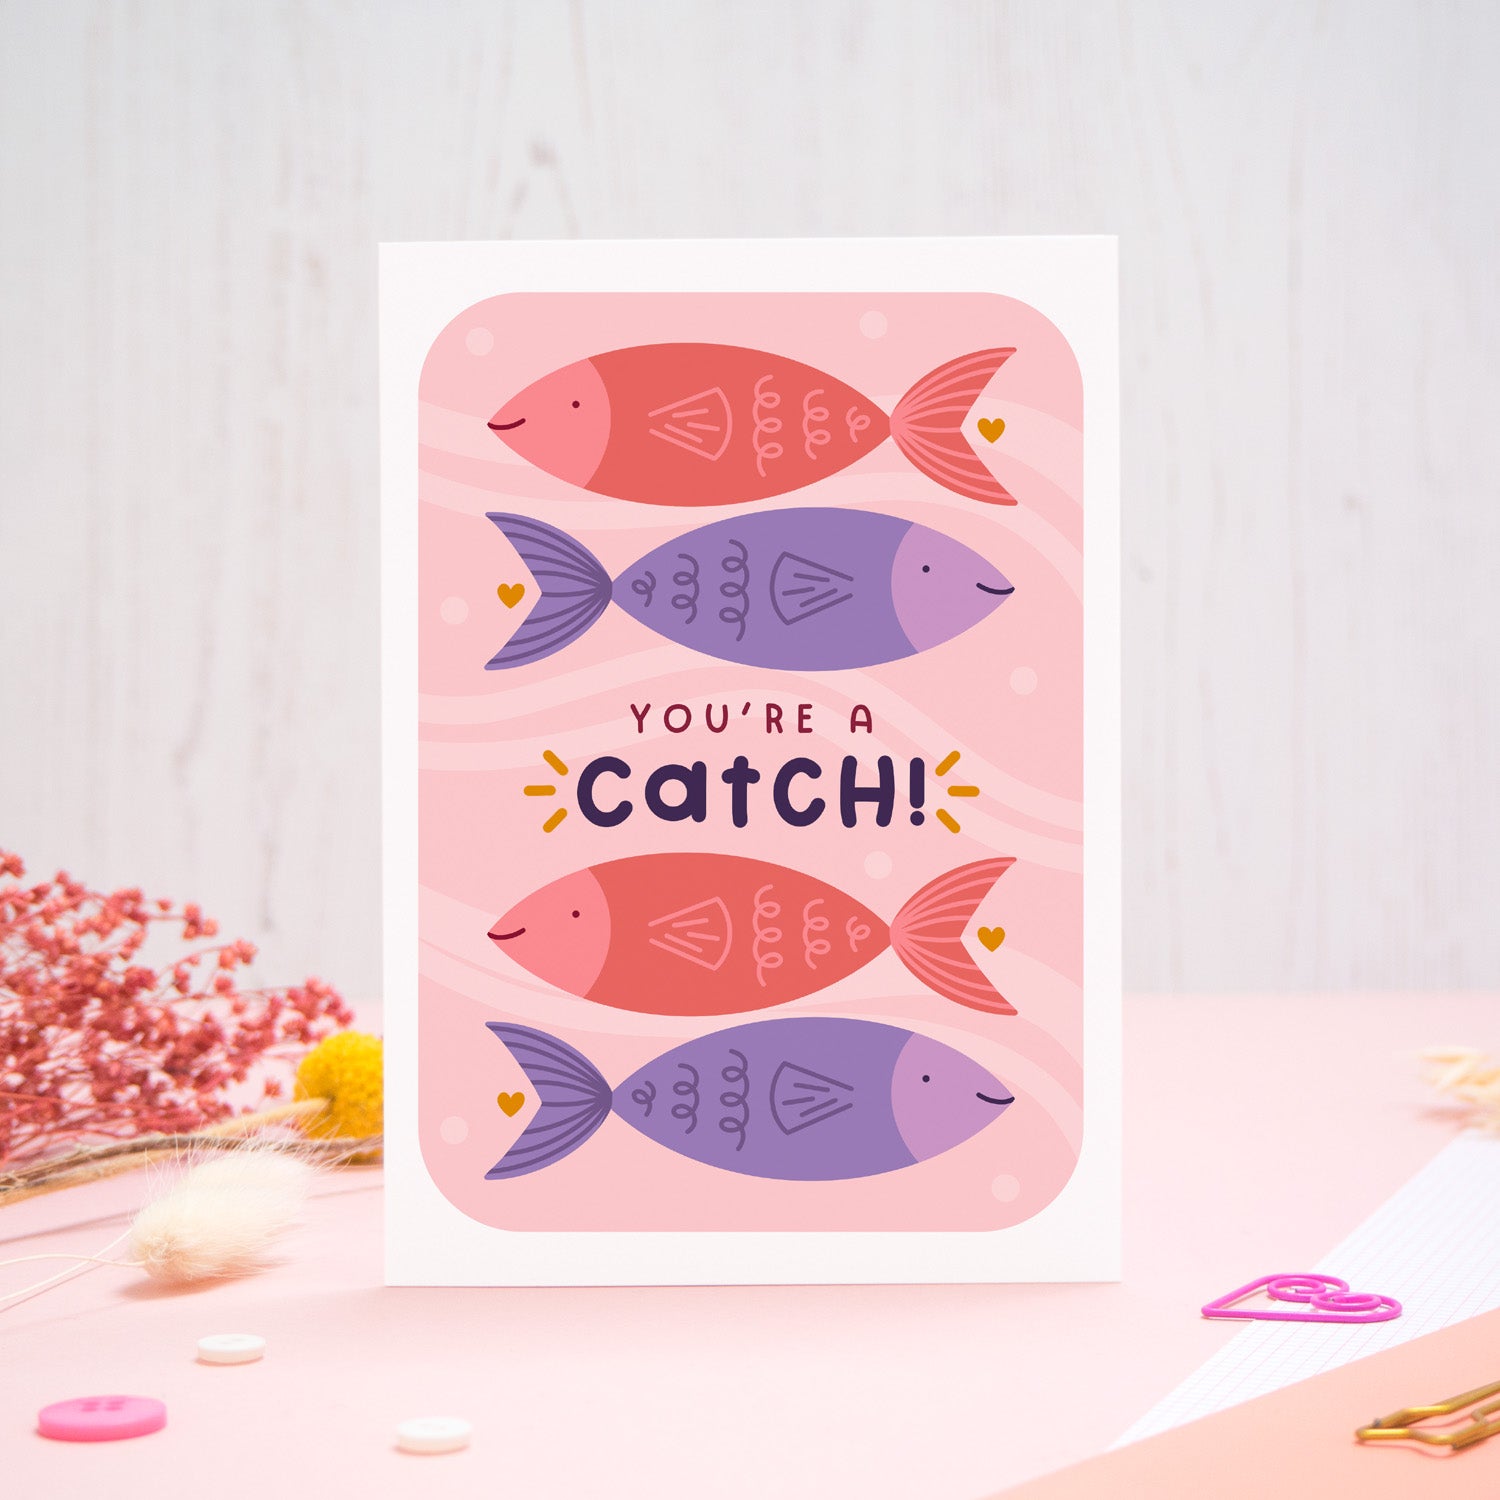 A Valentine’s pun card featuring illustrations of fish and the wording ‘you’re a catch’, photographed stood on a pink and white background with floral props, paper clips, and buttons. 